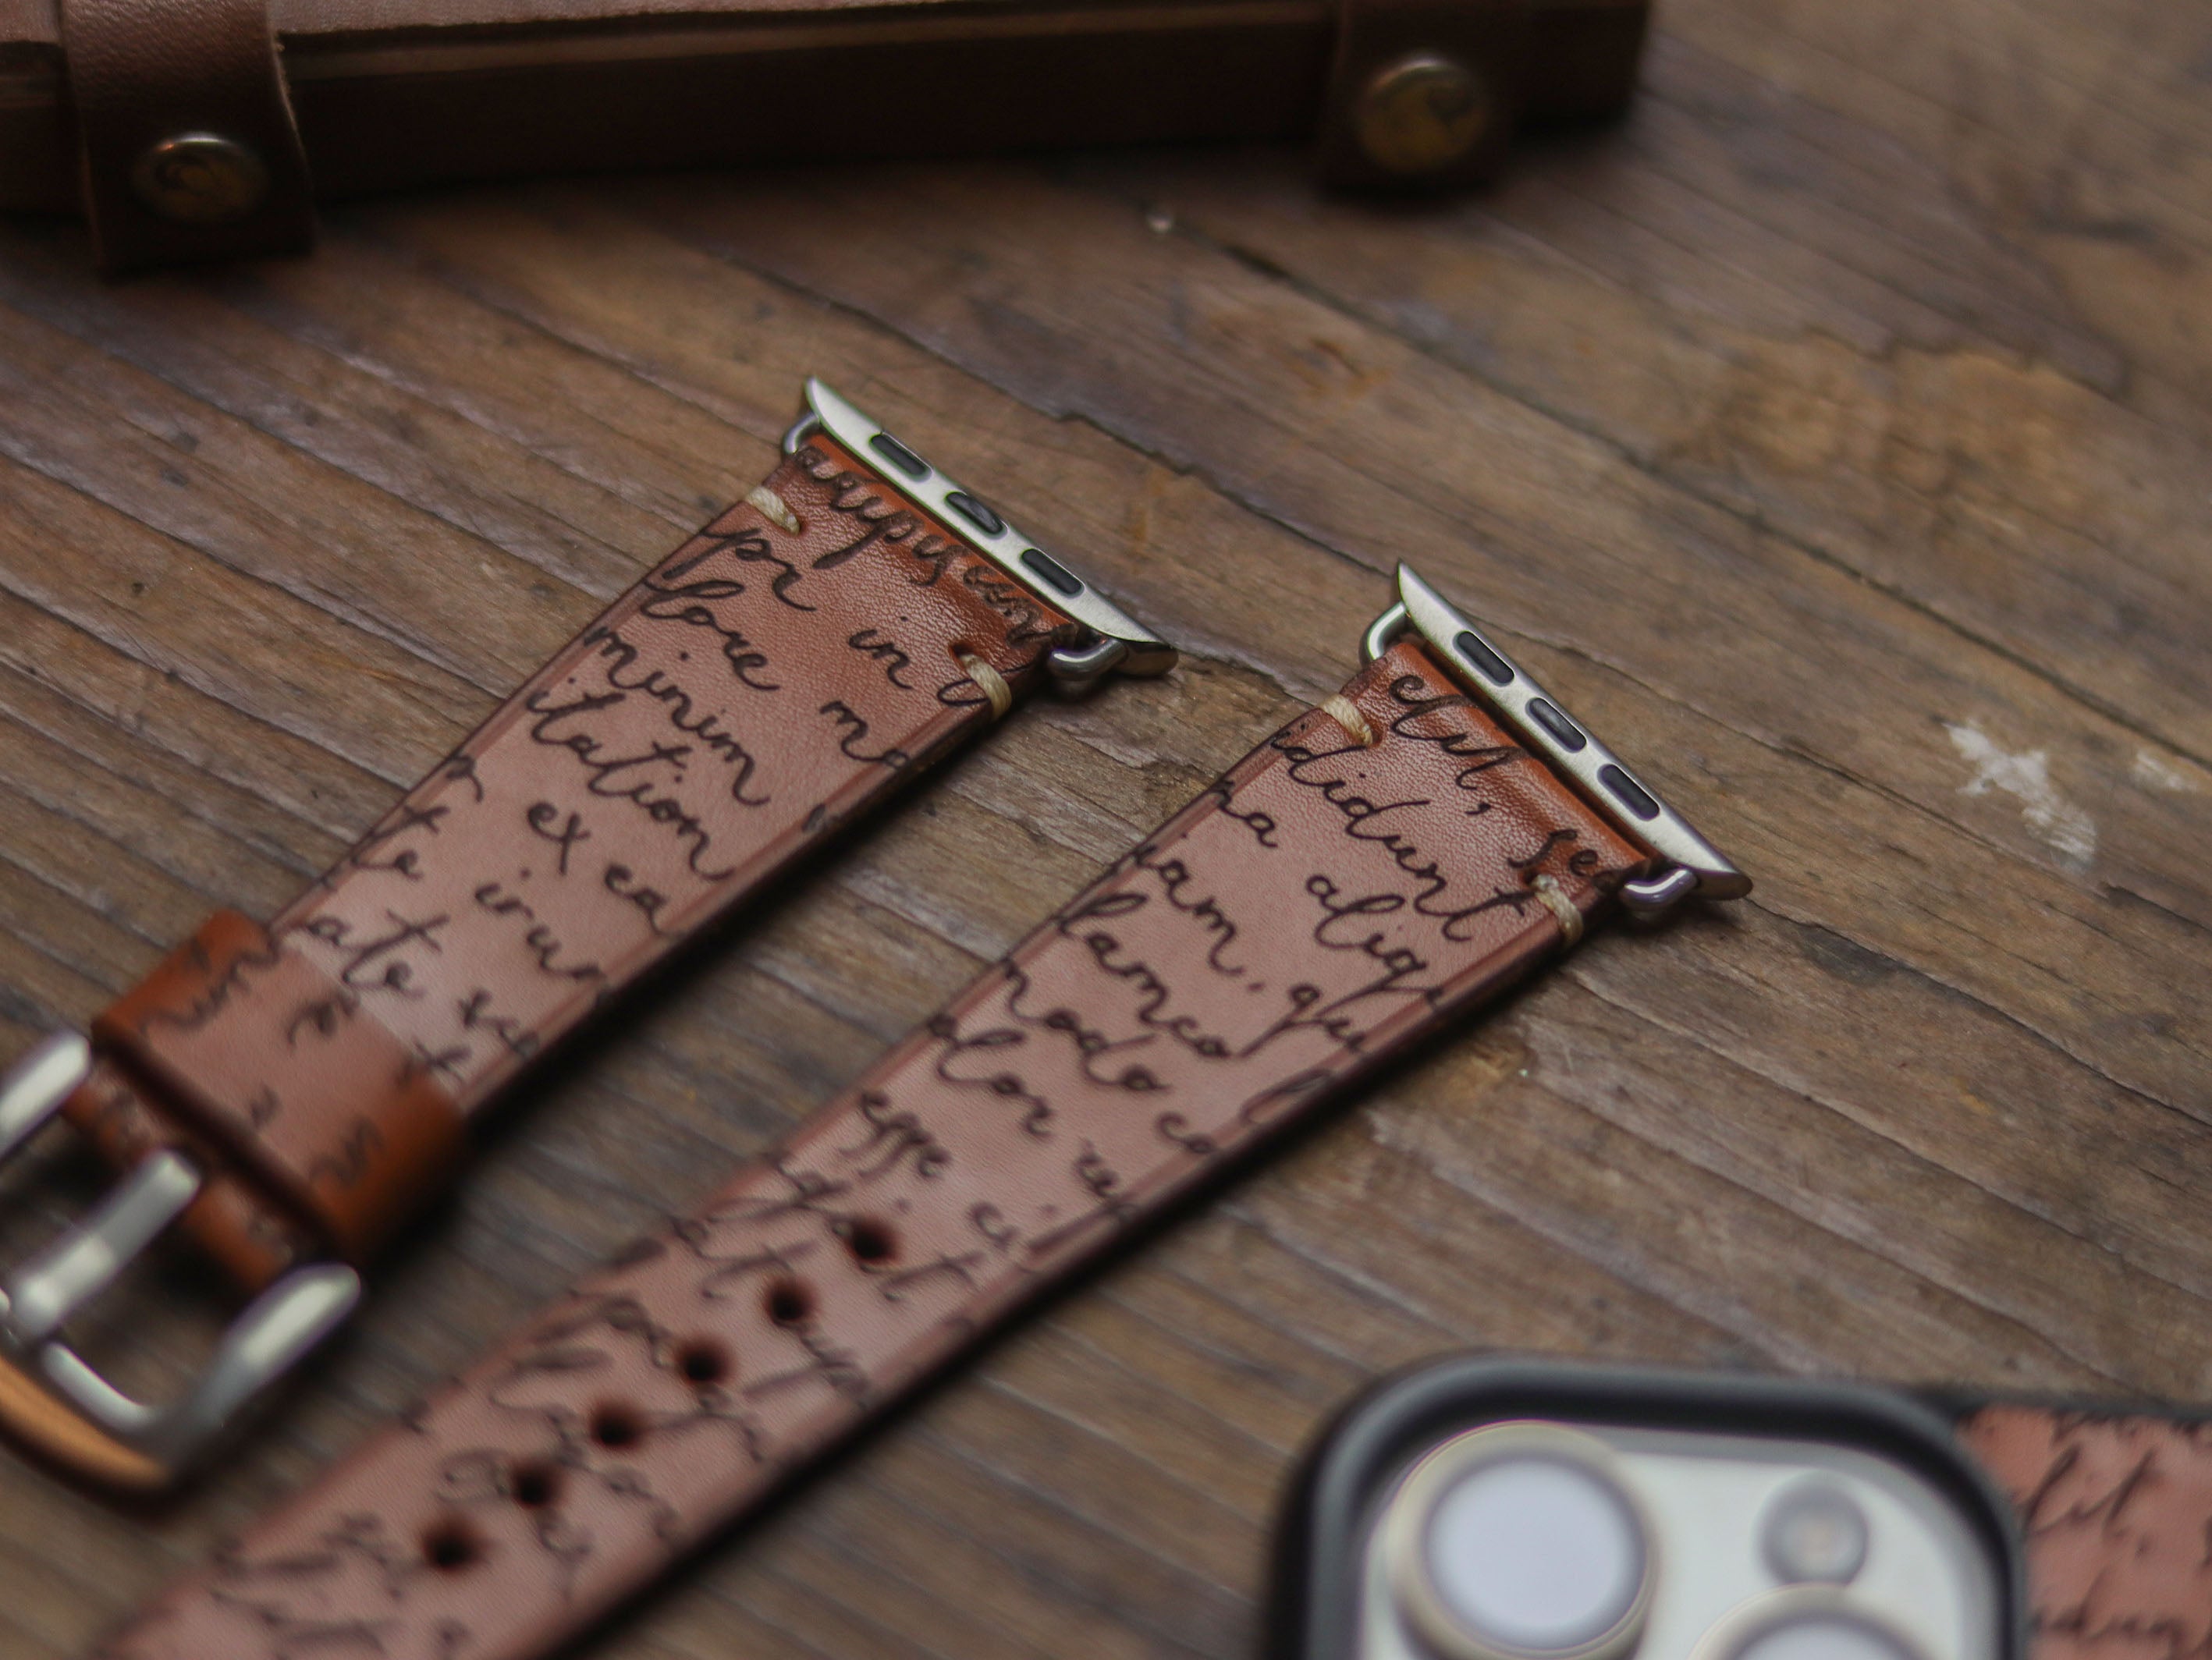 E3 ENGRAVED HAND-CRAFTED APPLE STRAPS - TAN BROWN